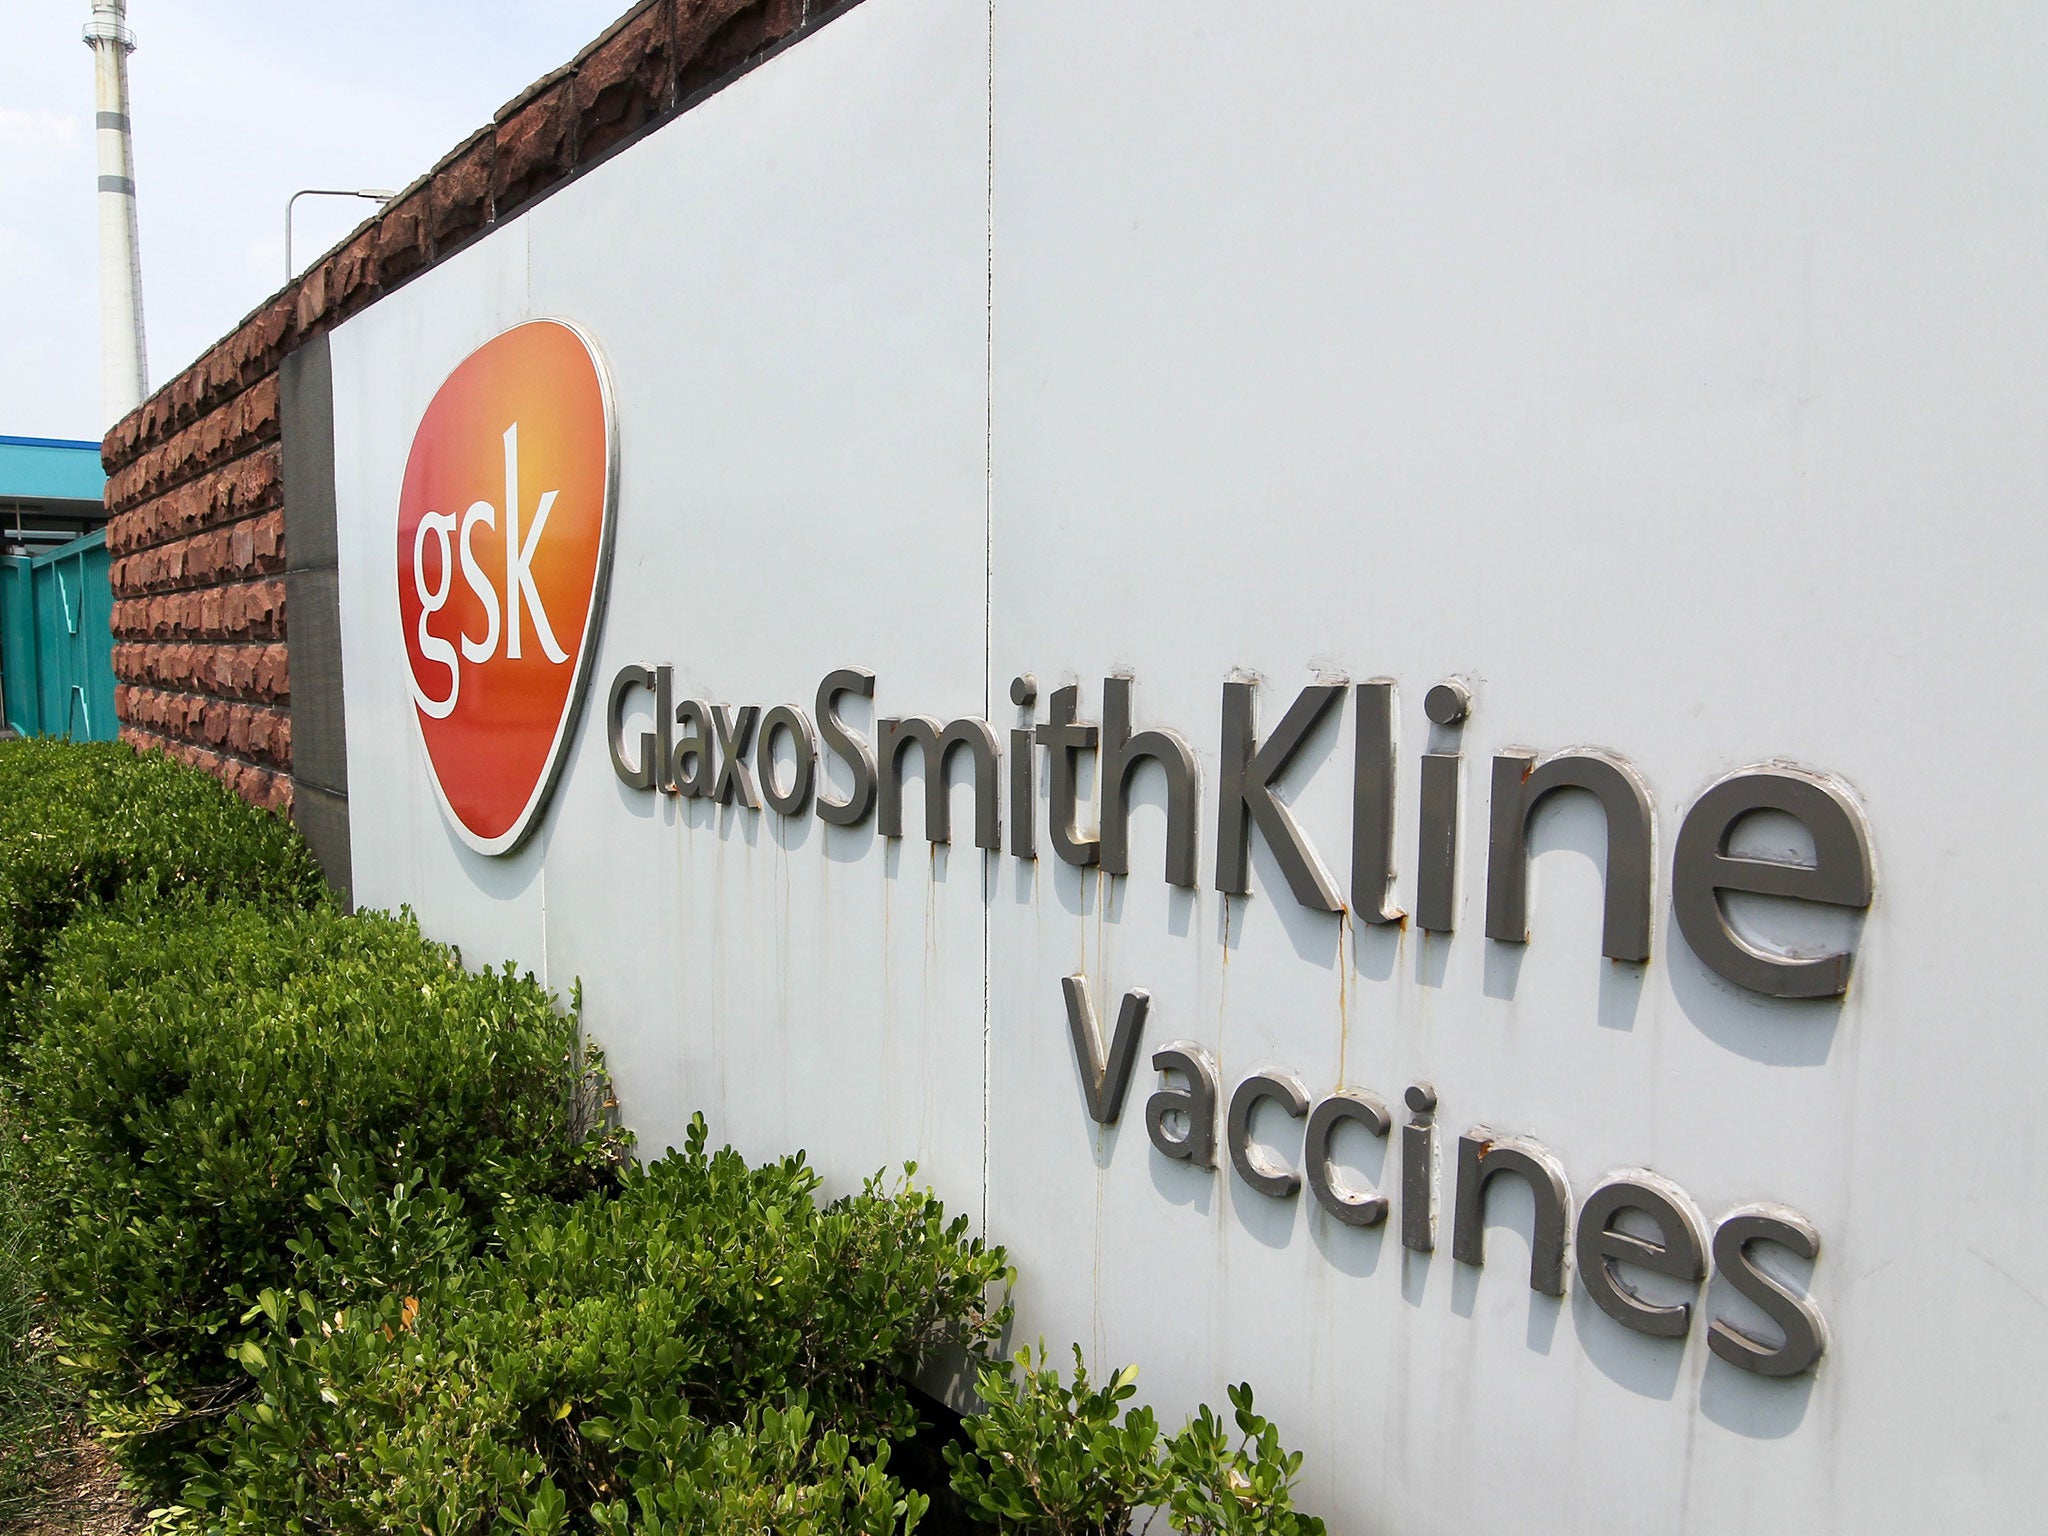 GSK has profited from sterling's woes